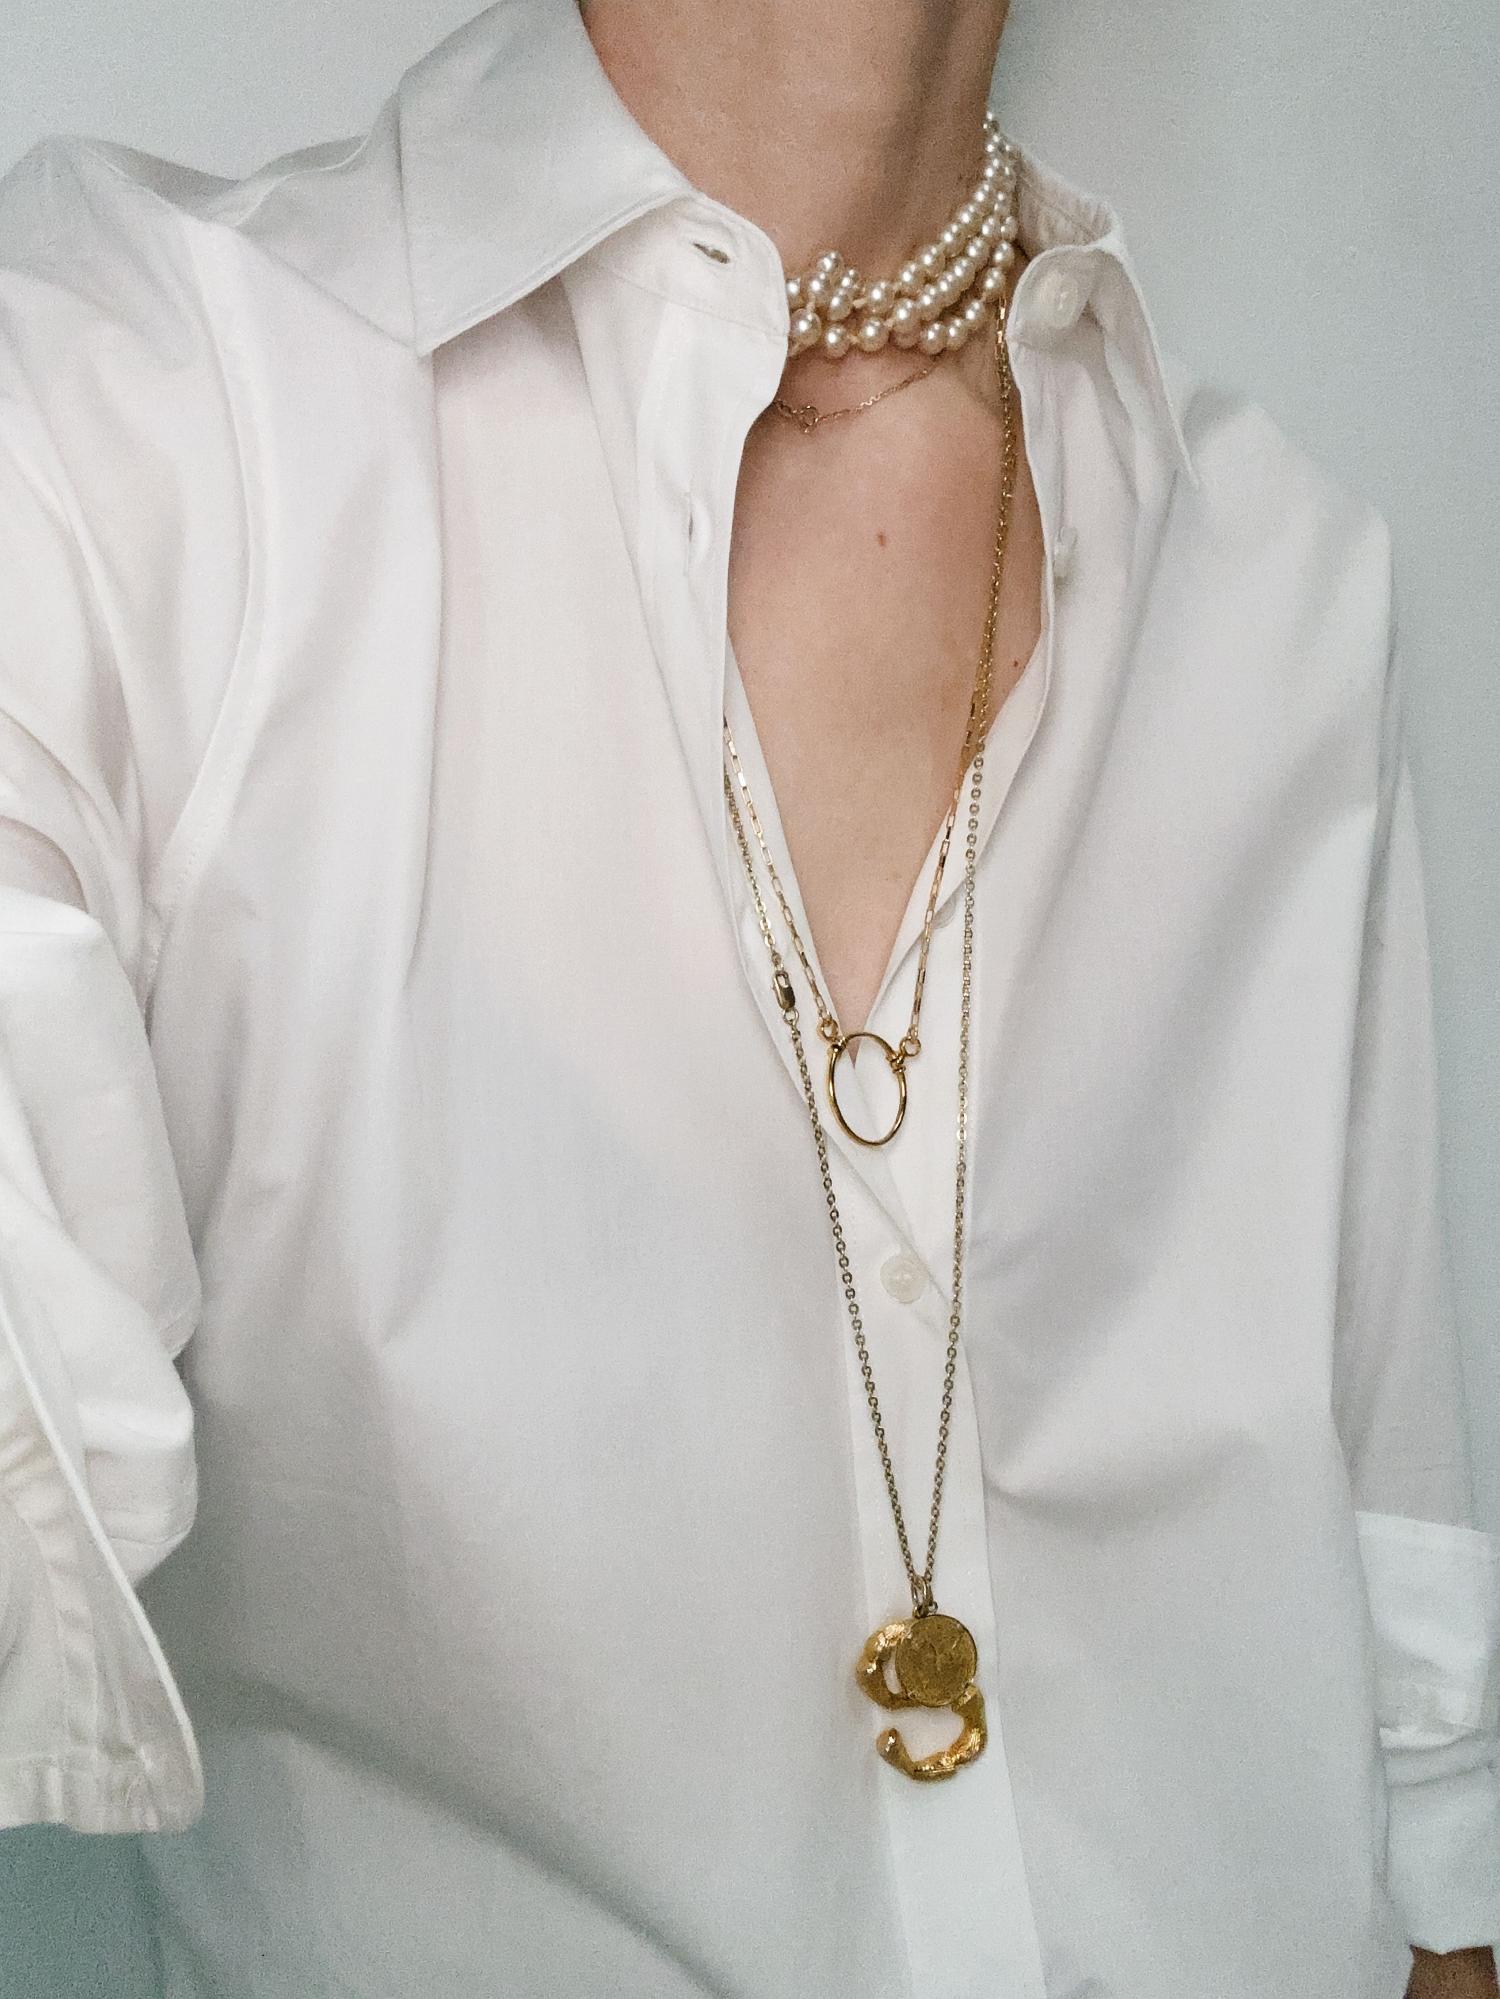 Stylist Suzanne Koller Creates the Perfect Wardrobe with Arket Timeless Pieces White Shirt